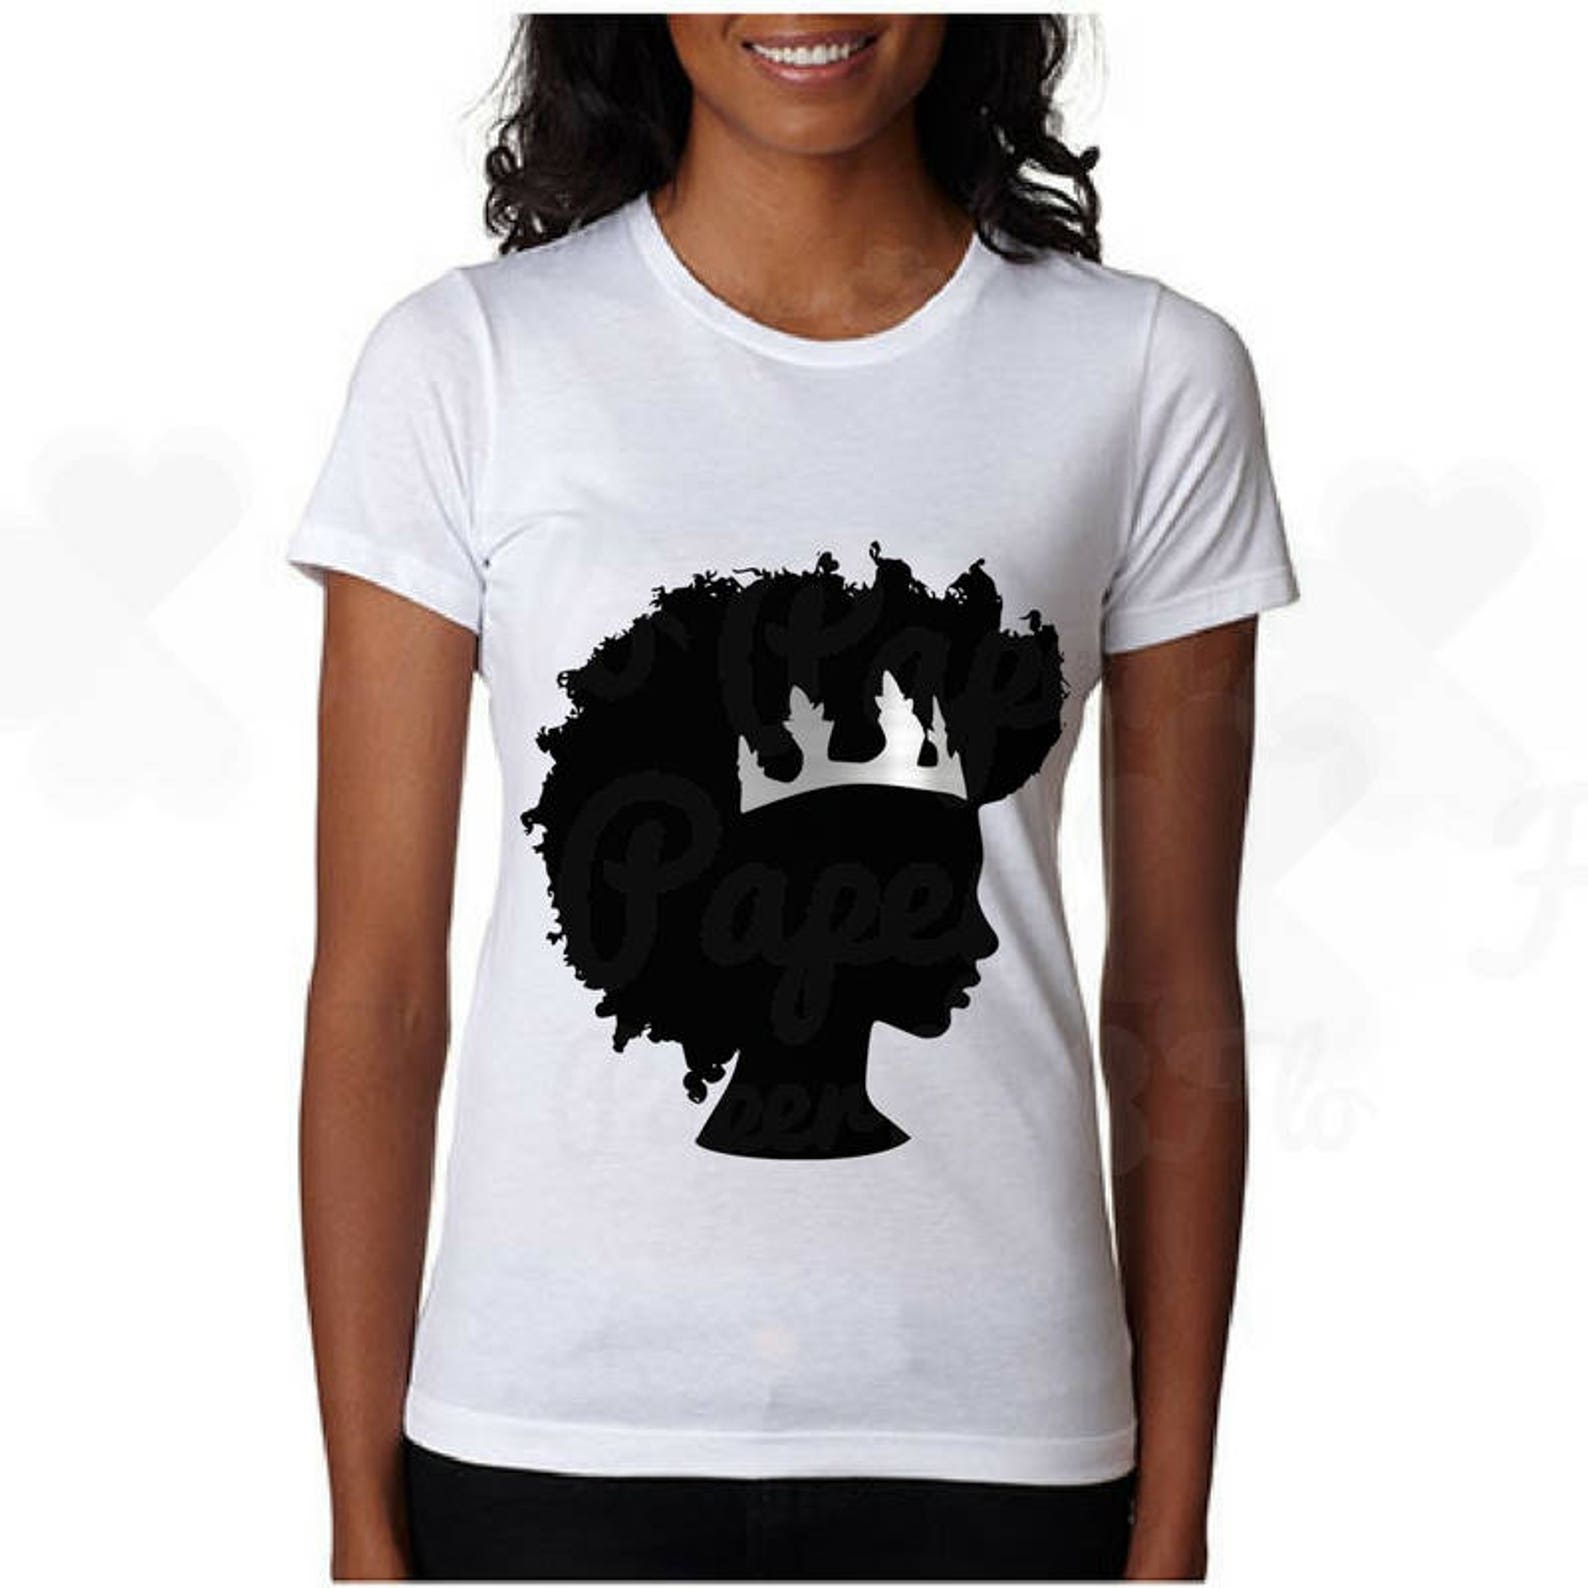 Afro svg silver crown clipart black woman svg black girl | Etsy